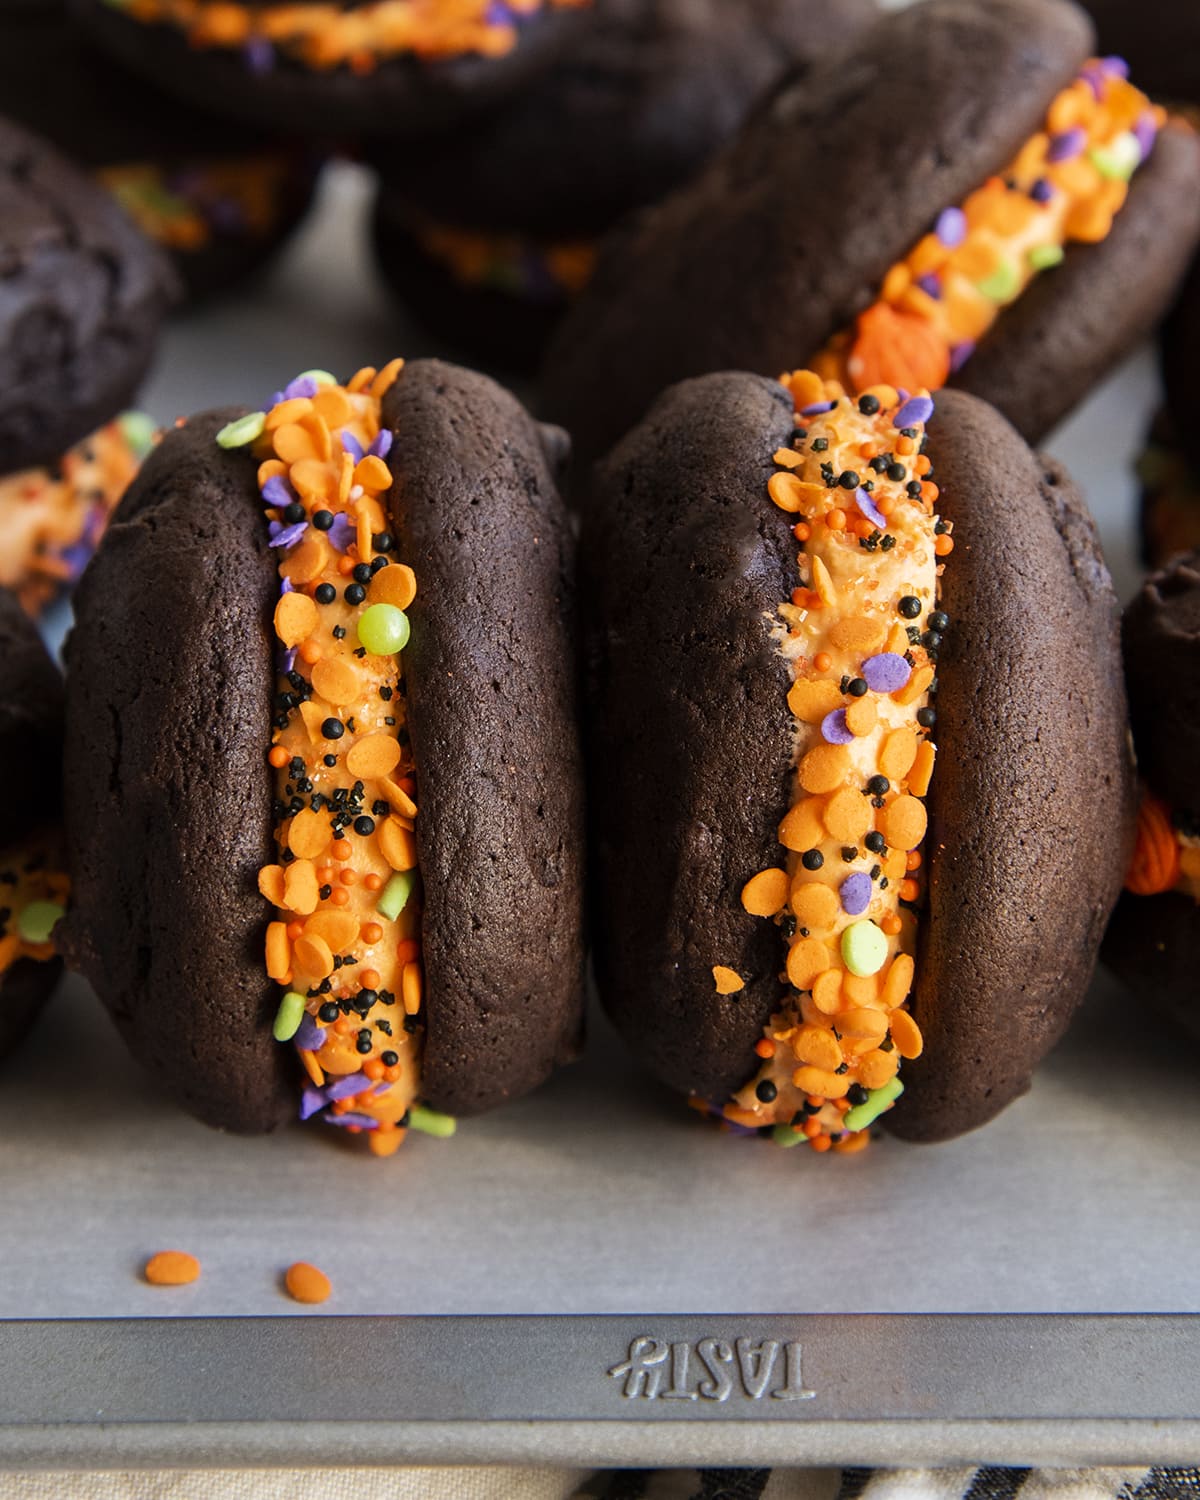 Two orange frosting filled chocolate whoopie pies on their side with a thick layer of frosting between them.